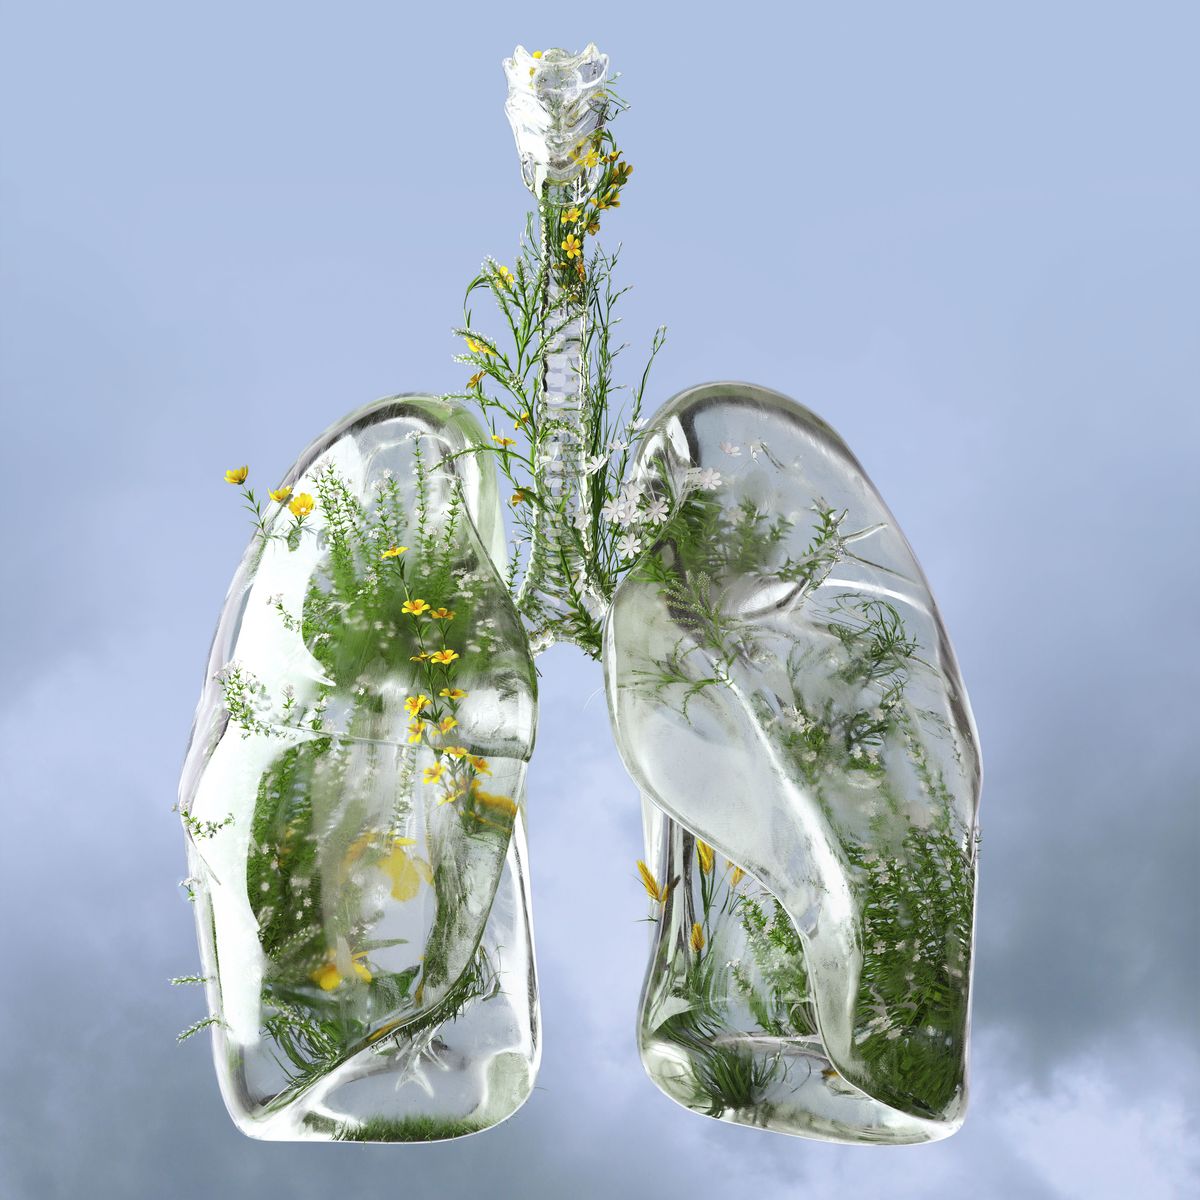 digital generated image of lungs made out of frosted glass and filled with plants and flowers on blue background breathe easier